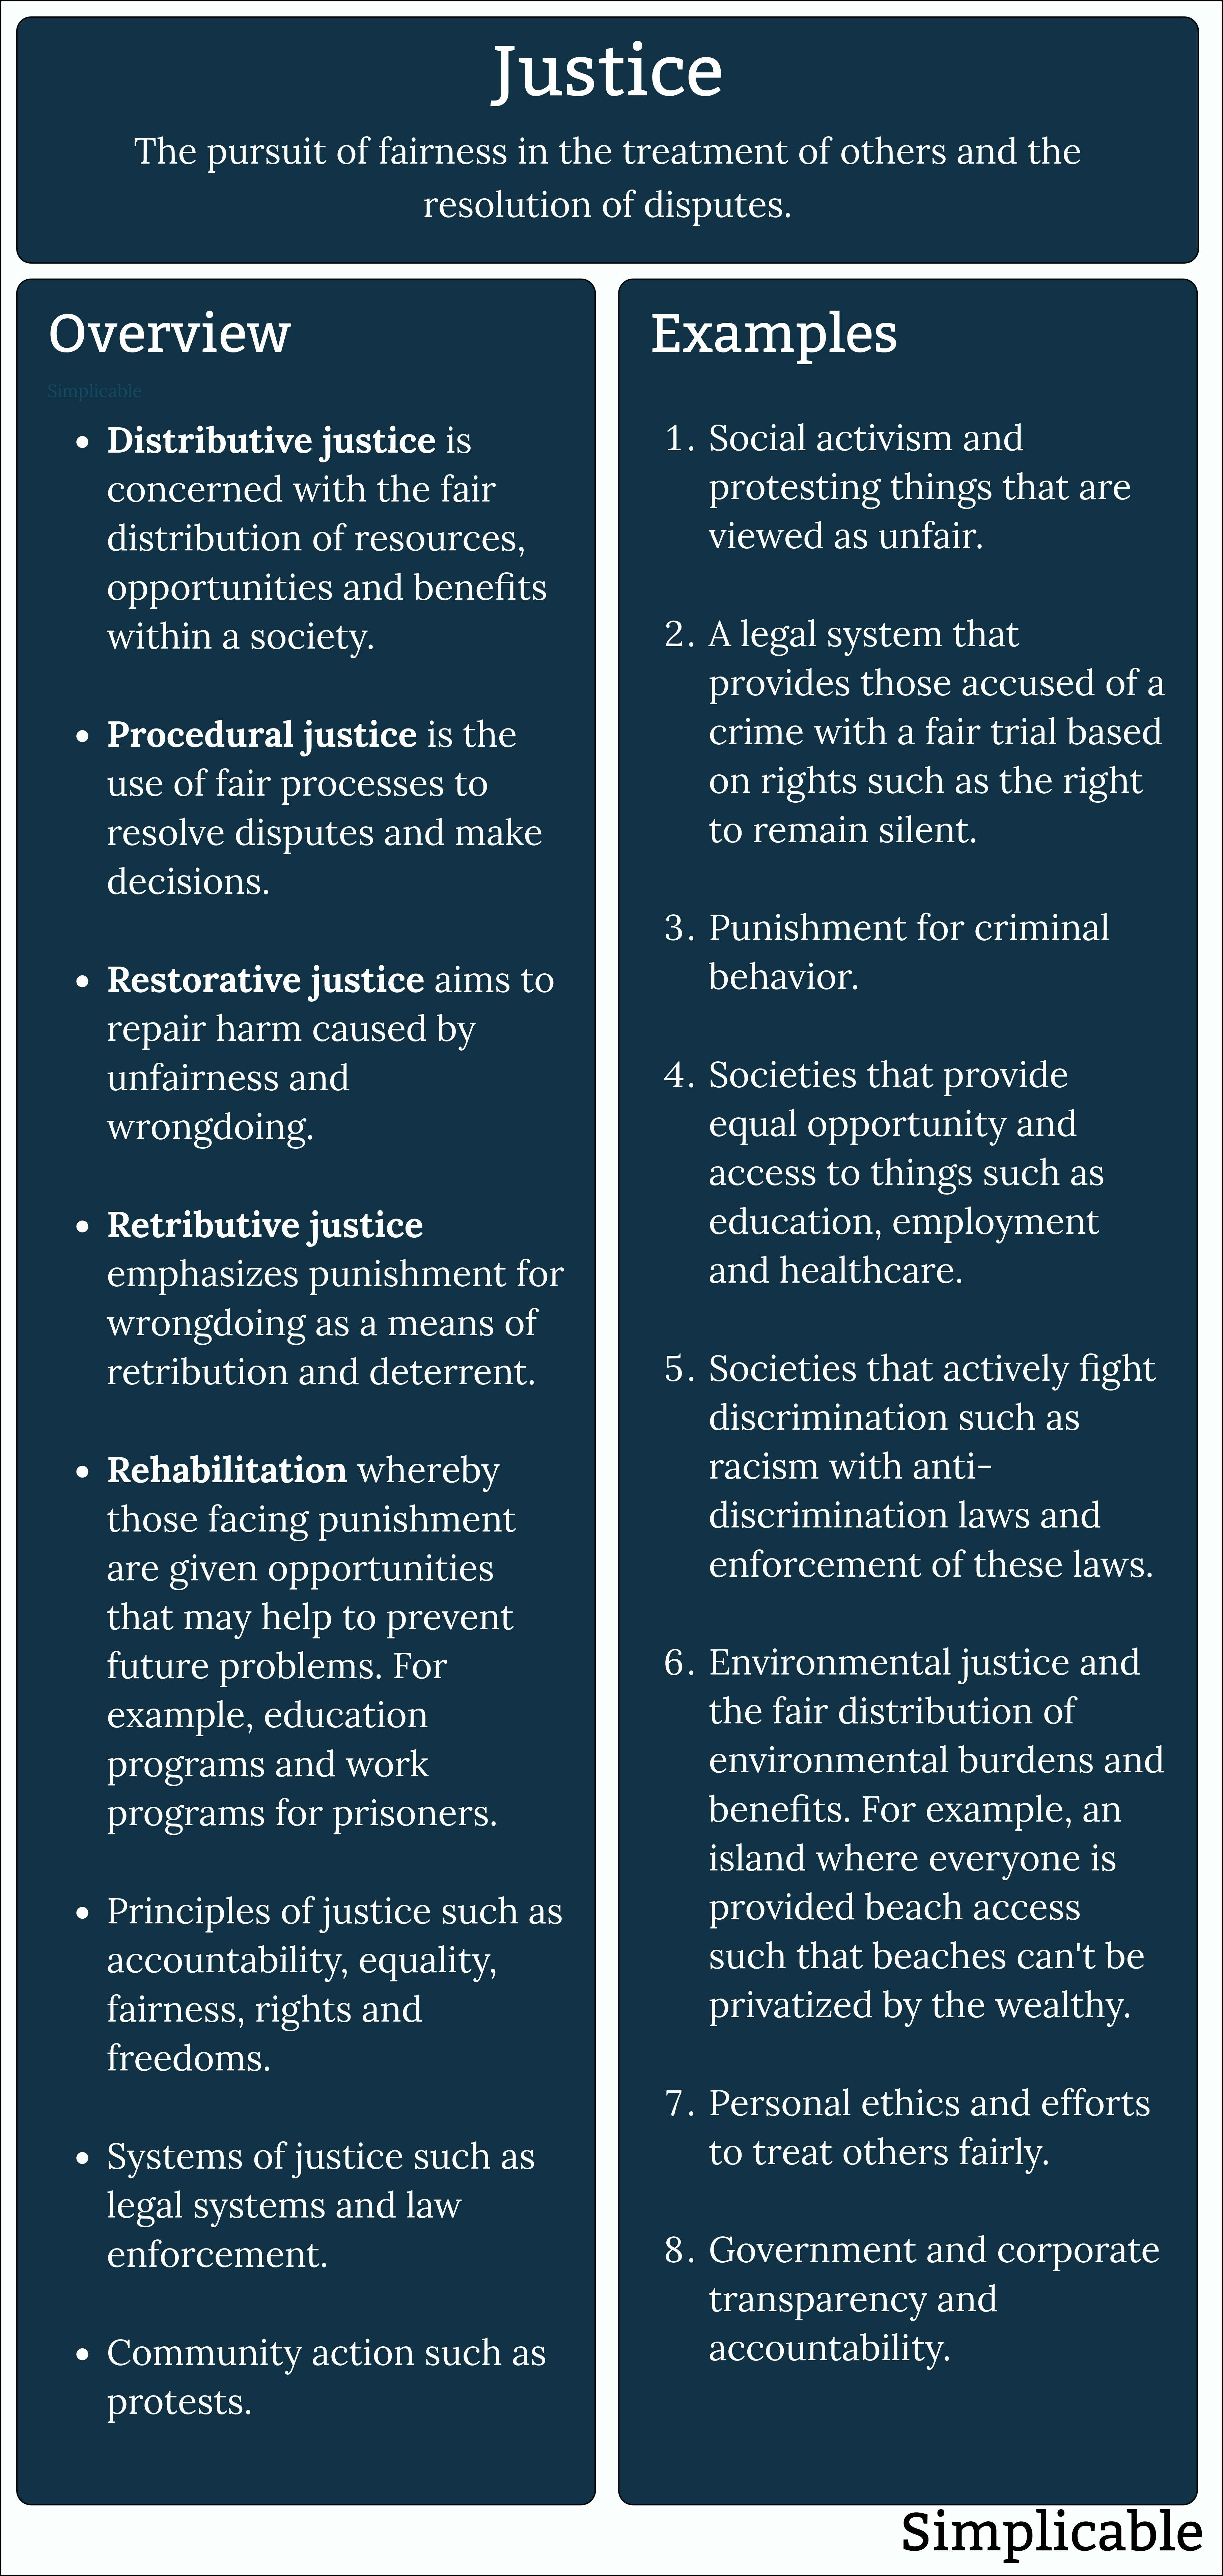 justice overview and examples